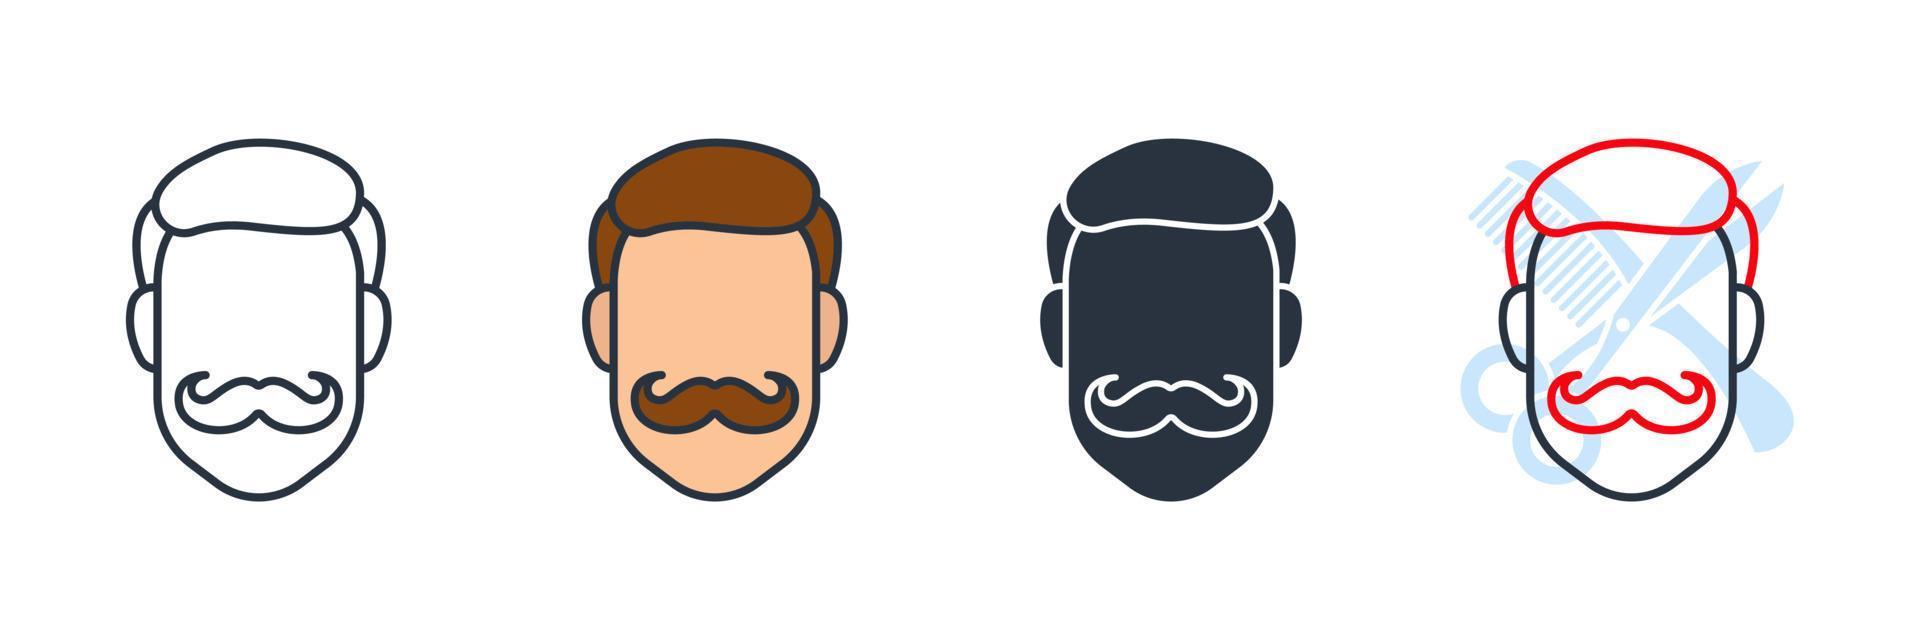 hair cut icon logo vector illustration. gentle man smooth haircut symbol template for graphic and web design collection